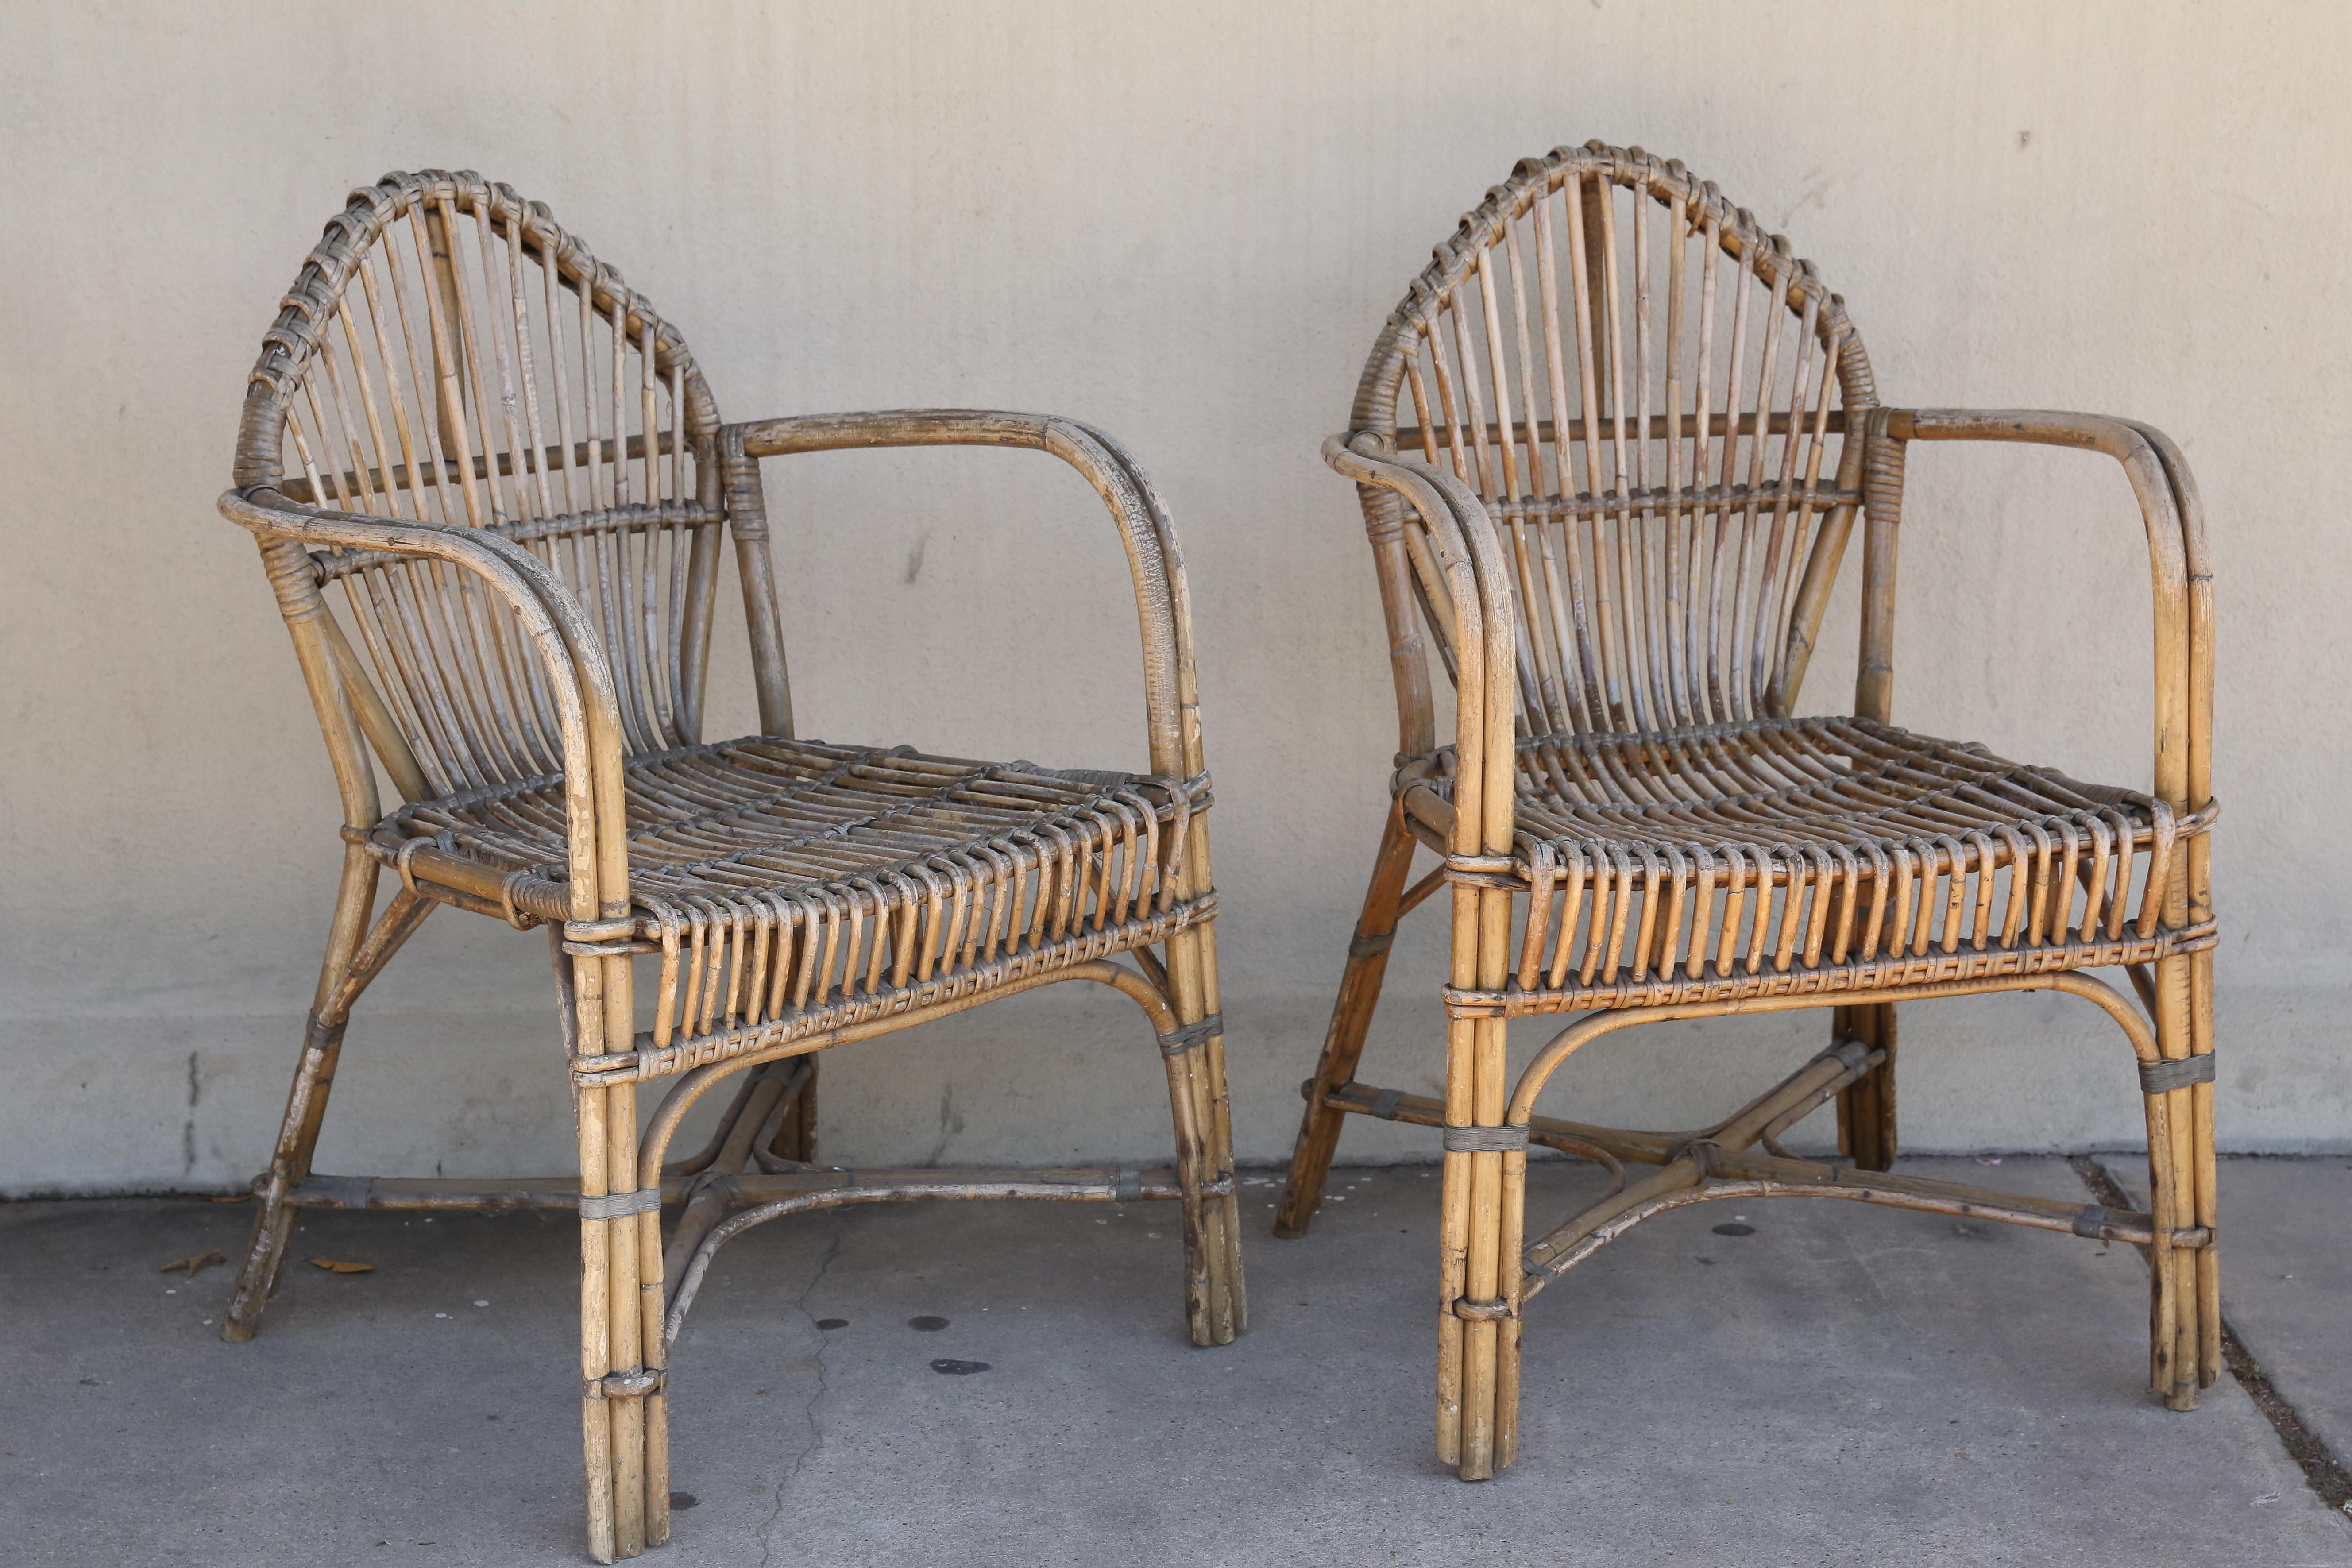 A charming pair of antique French rattan armchairs, found in Belgium, perfect for your outdoor living space or inside, bringing the natural element of hand-worked rattan to your environment. These look fantastic with oversized pillows, and have a